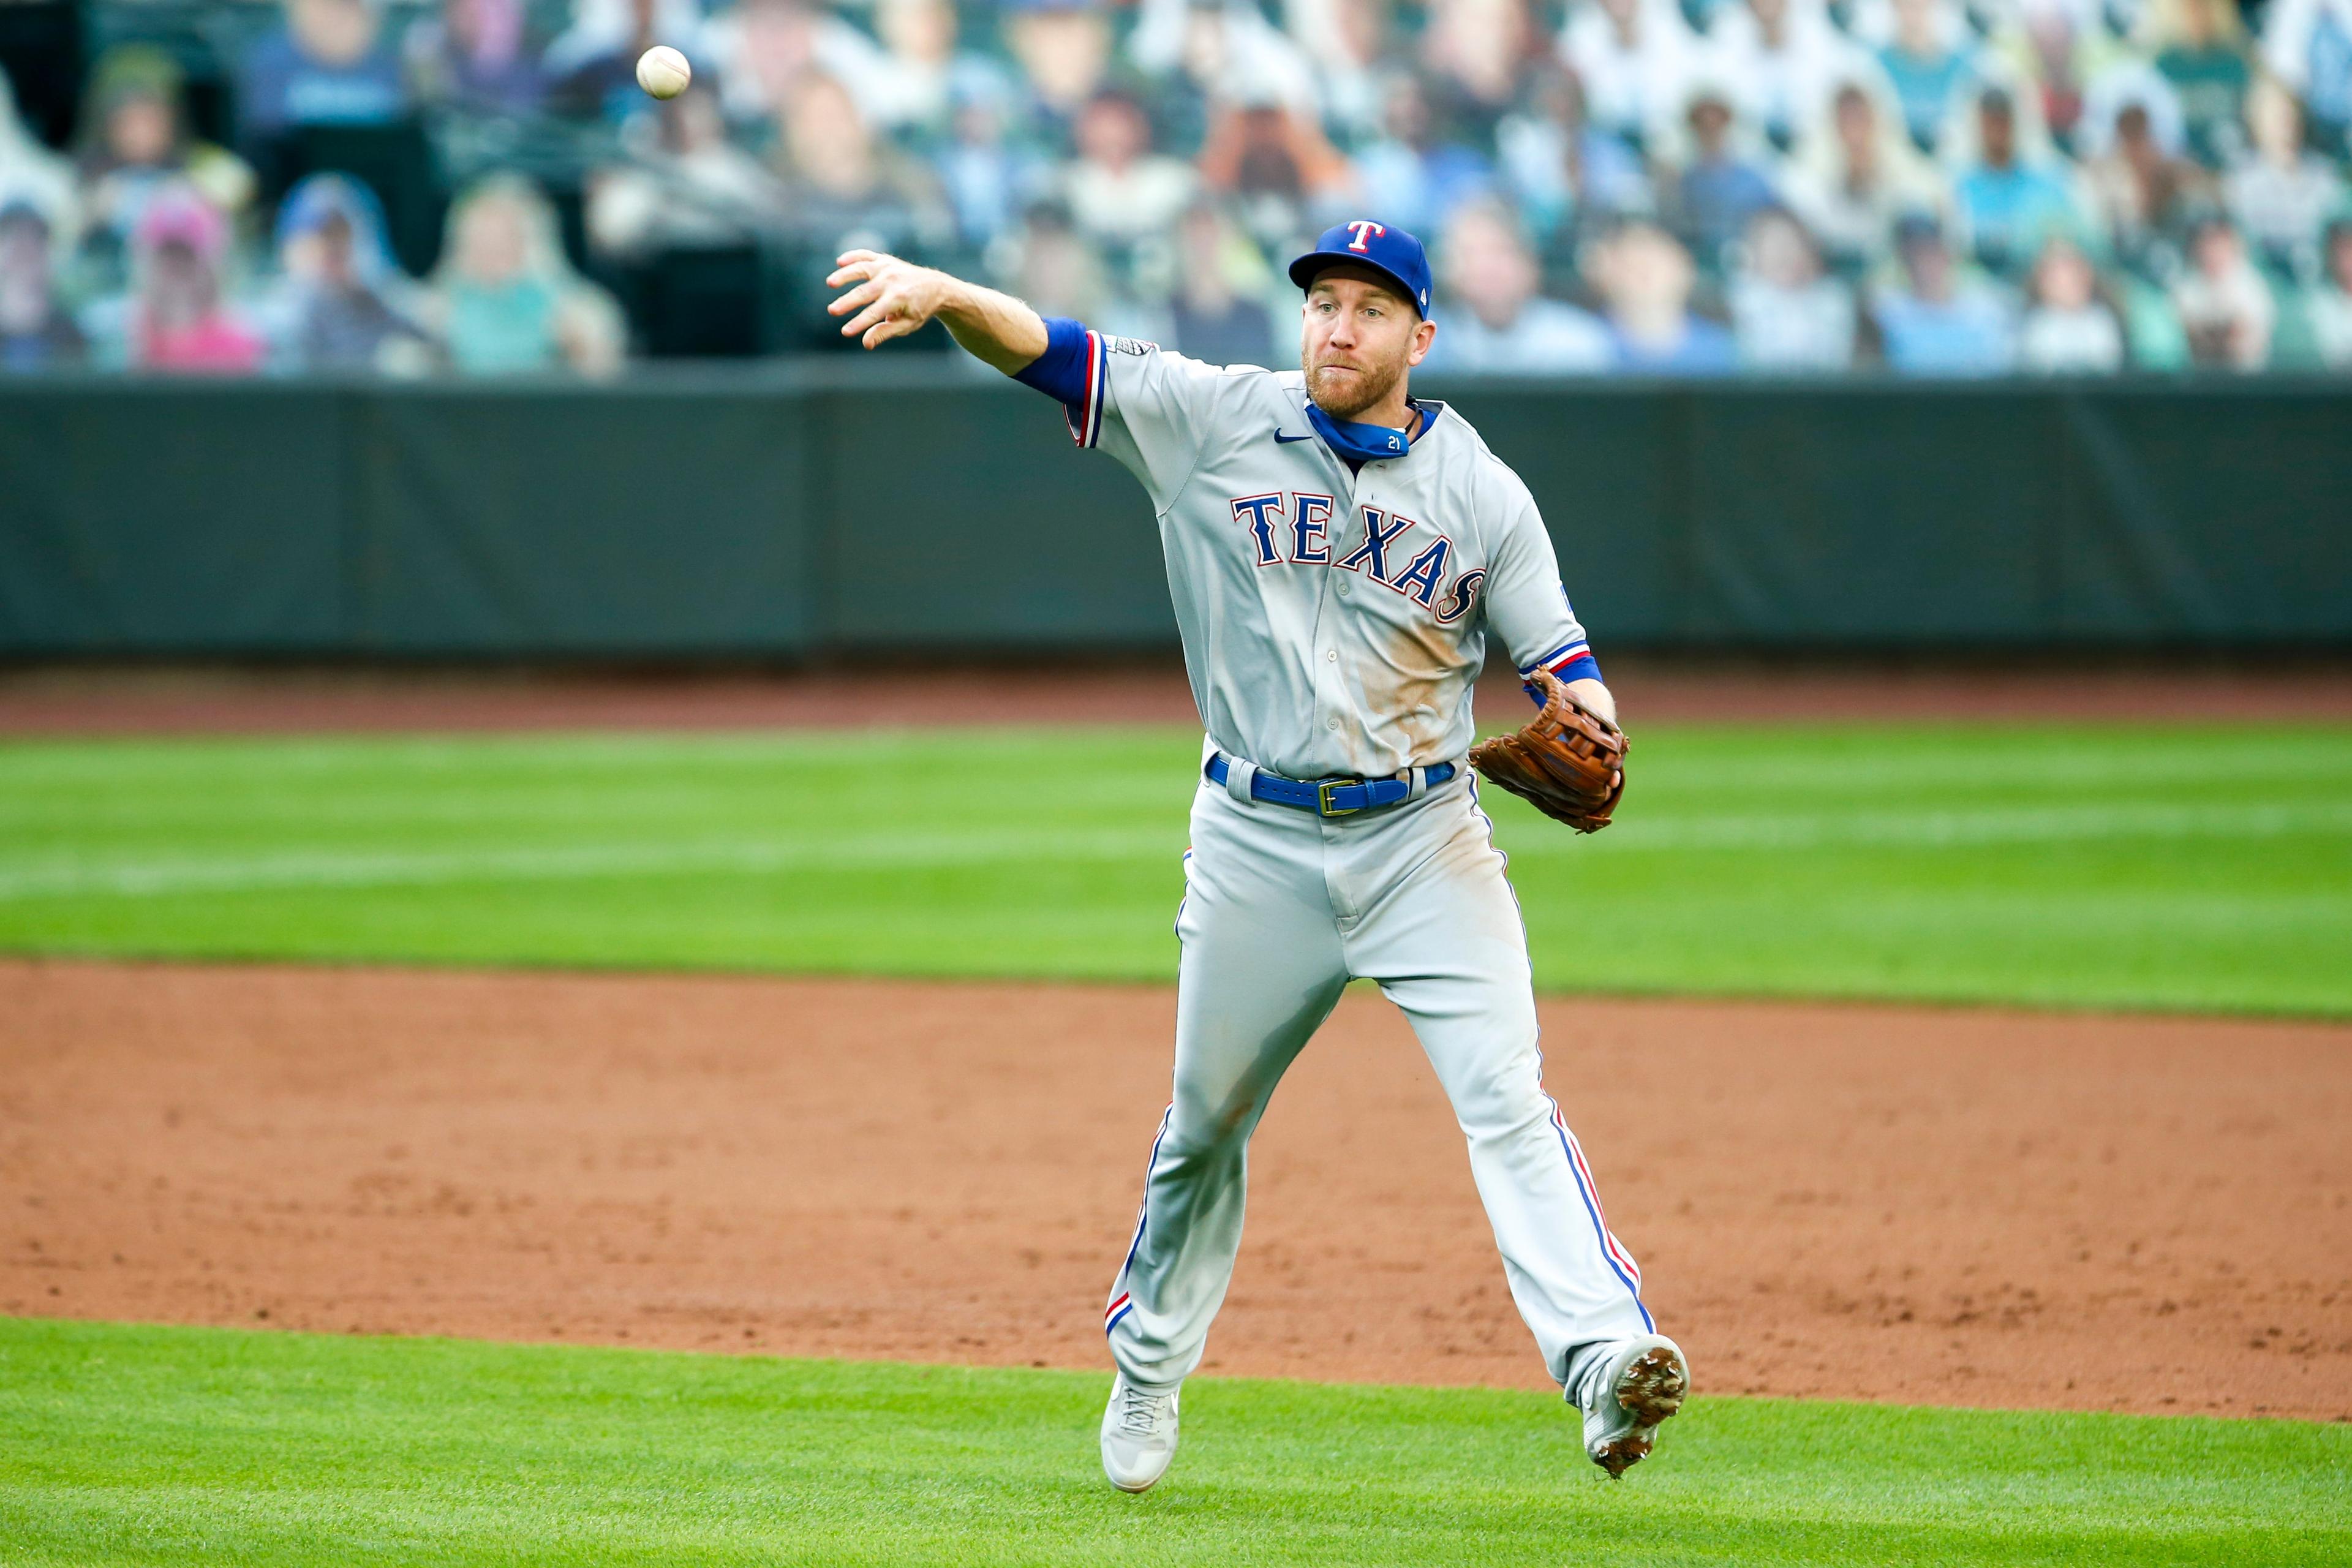 Aug 21, 2020; Seattle, Washington, USA; Texas Rangers third baseman Todd Frazier (21) throws to first base late for an infield single against the Seattle Mariners during the third inning at T-Mobile Park. / © Joe Nicholson-USA TODAY Sports